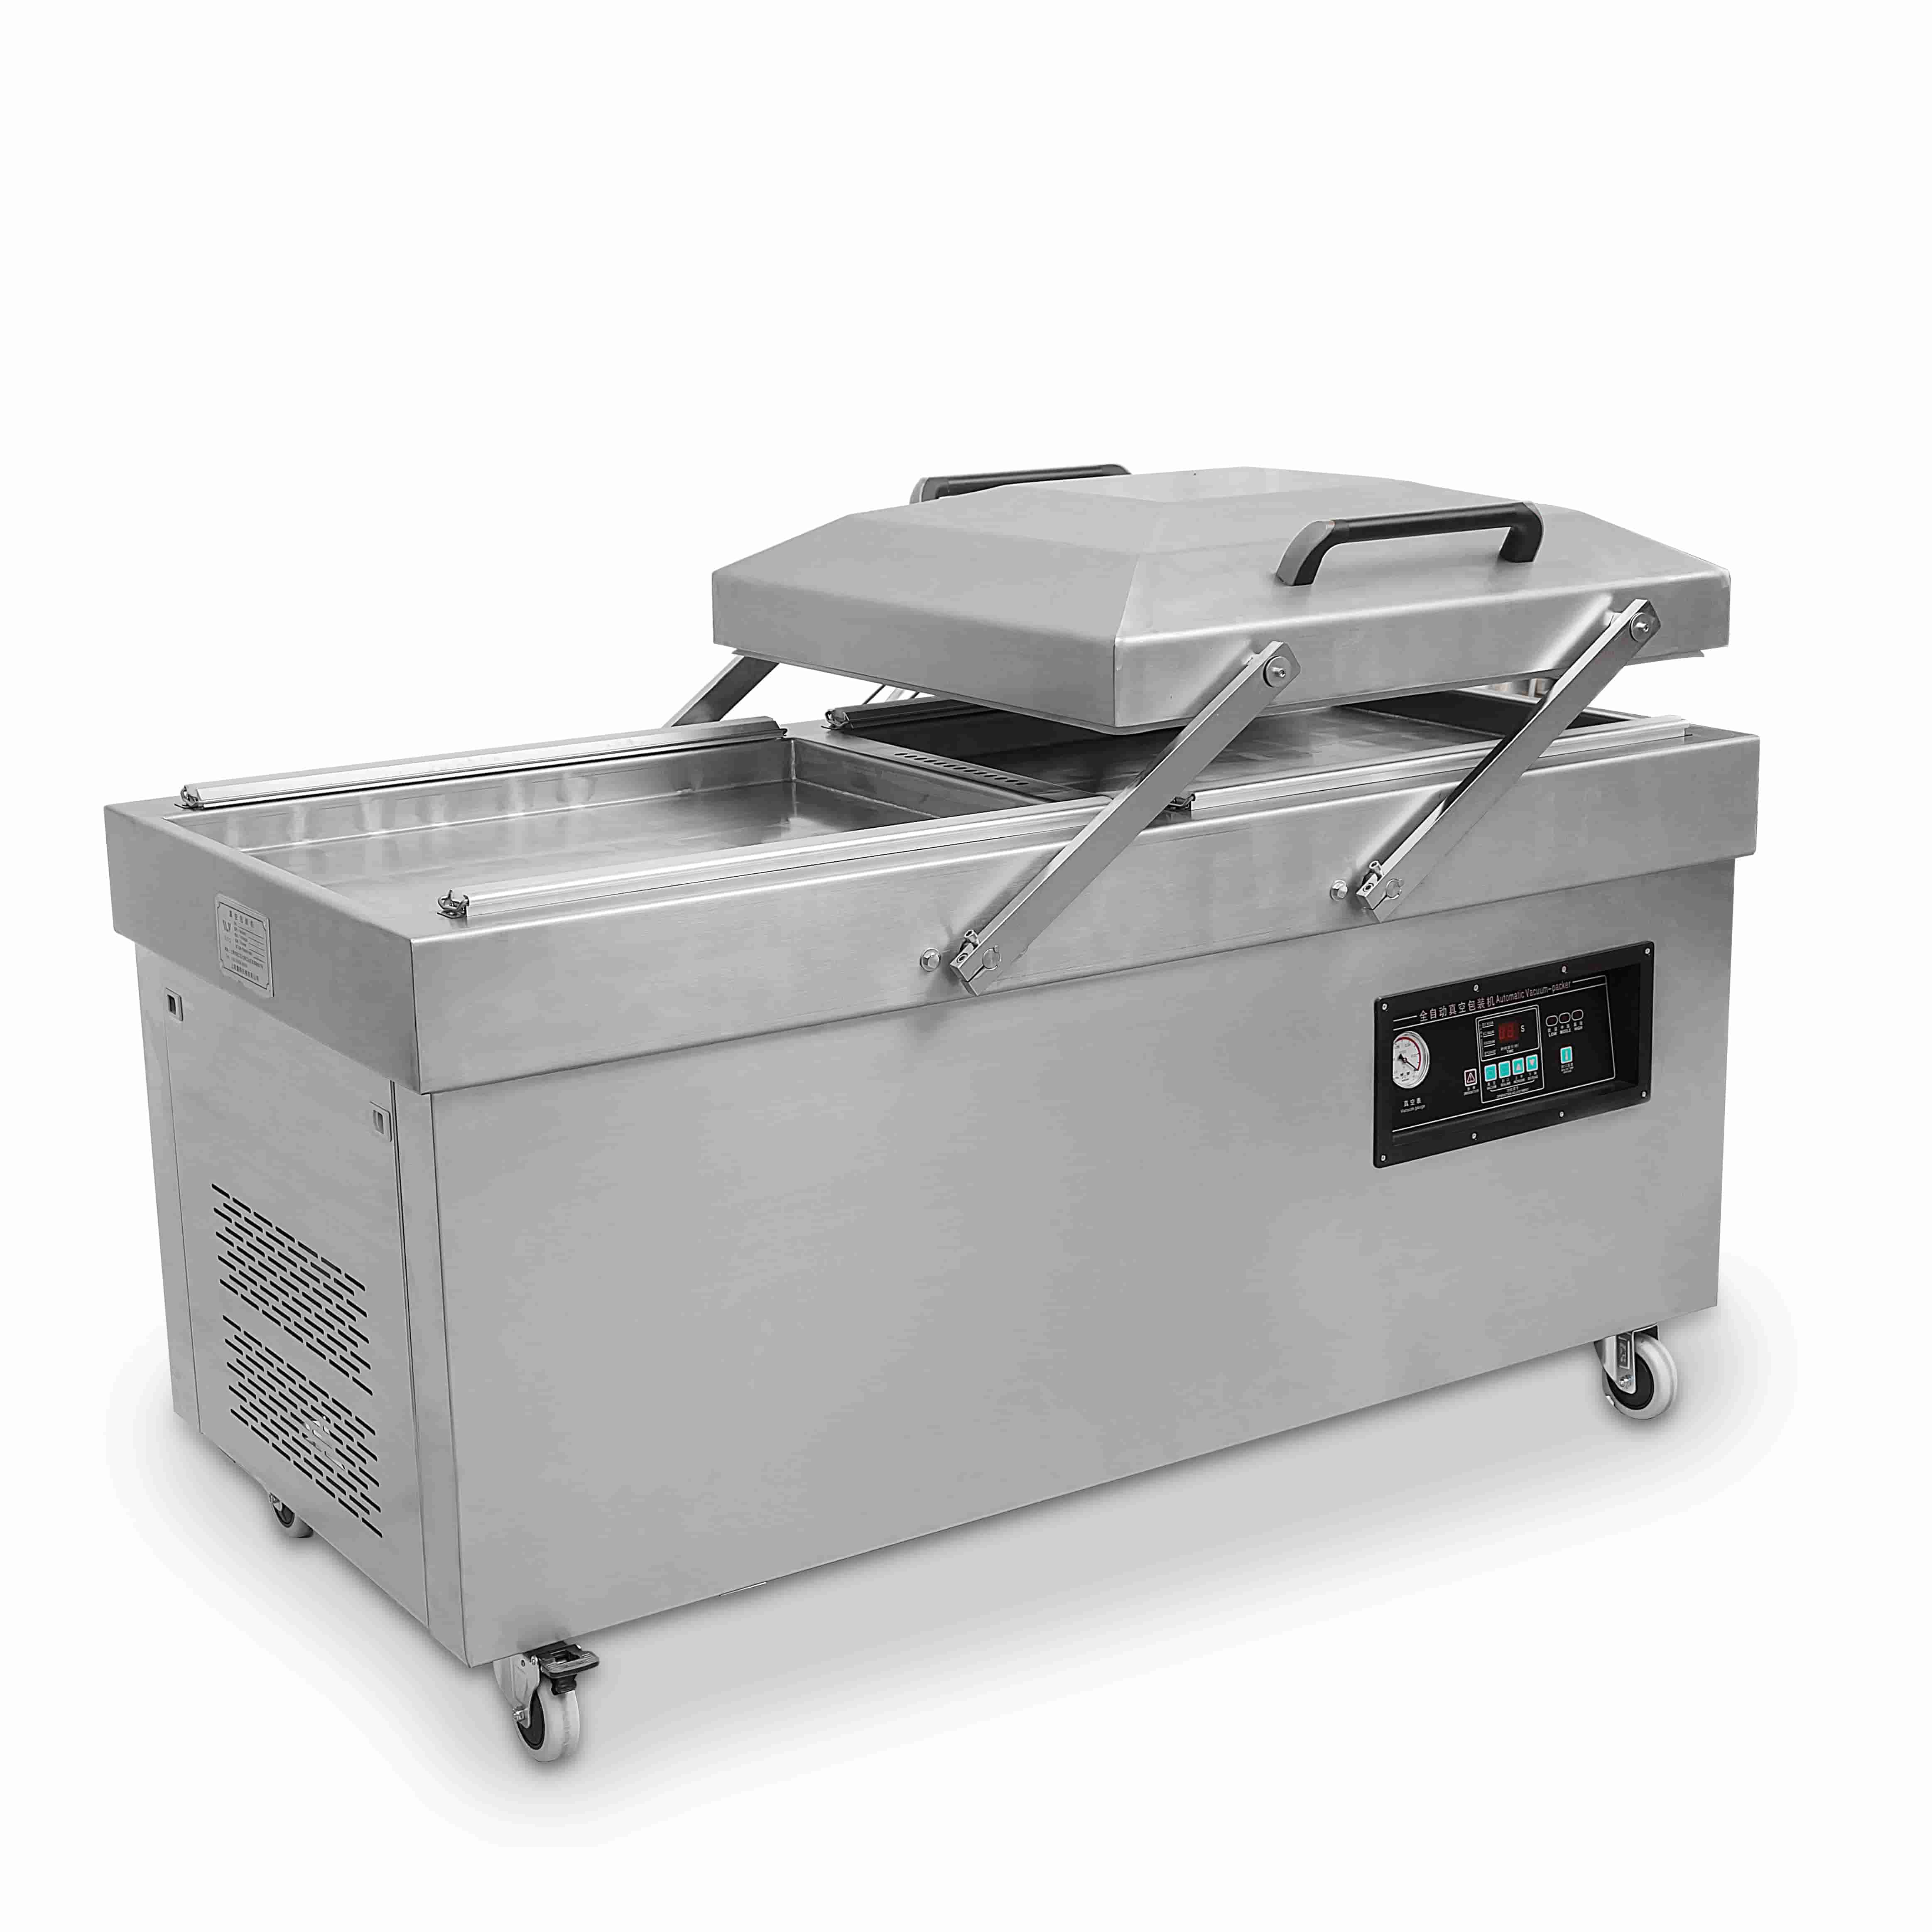 Three methods to deal with the abnormal work of vacuum lid of double chambers vacuum packing machine